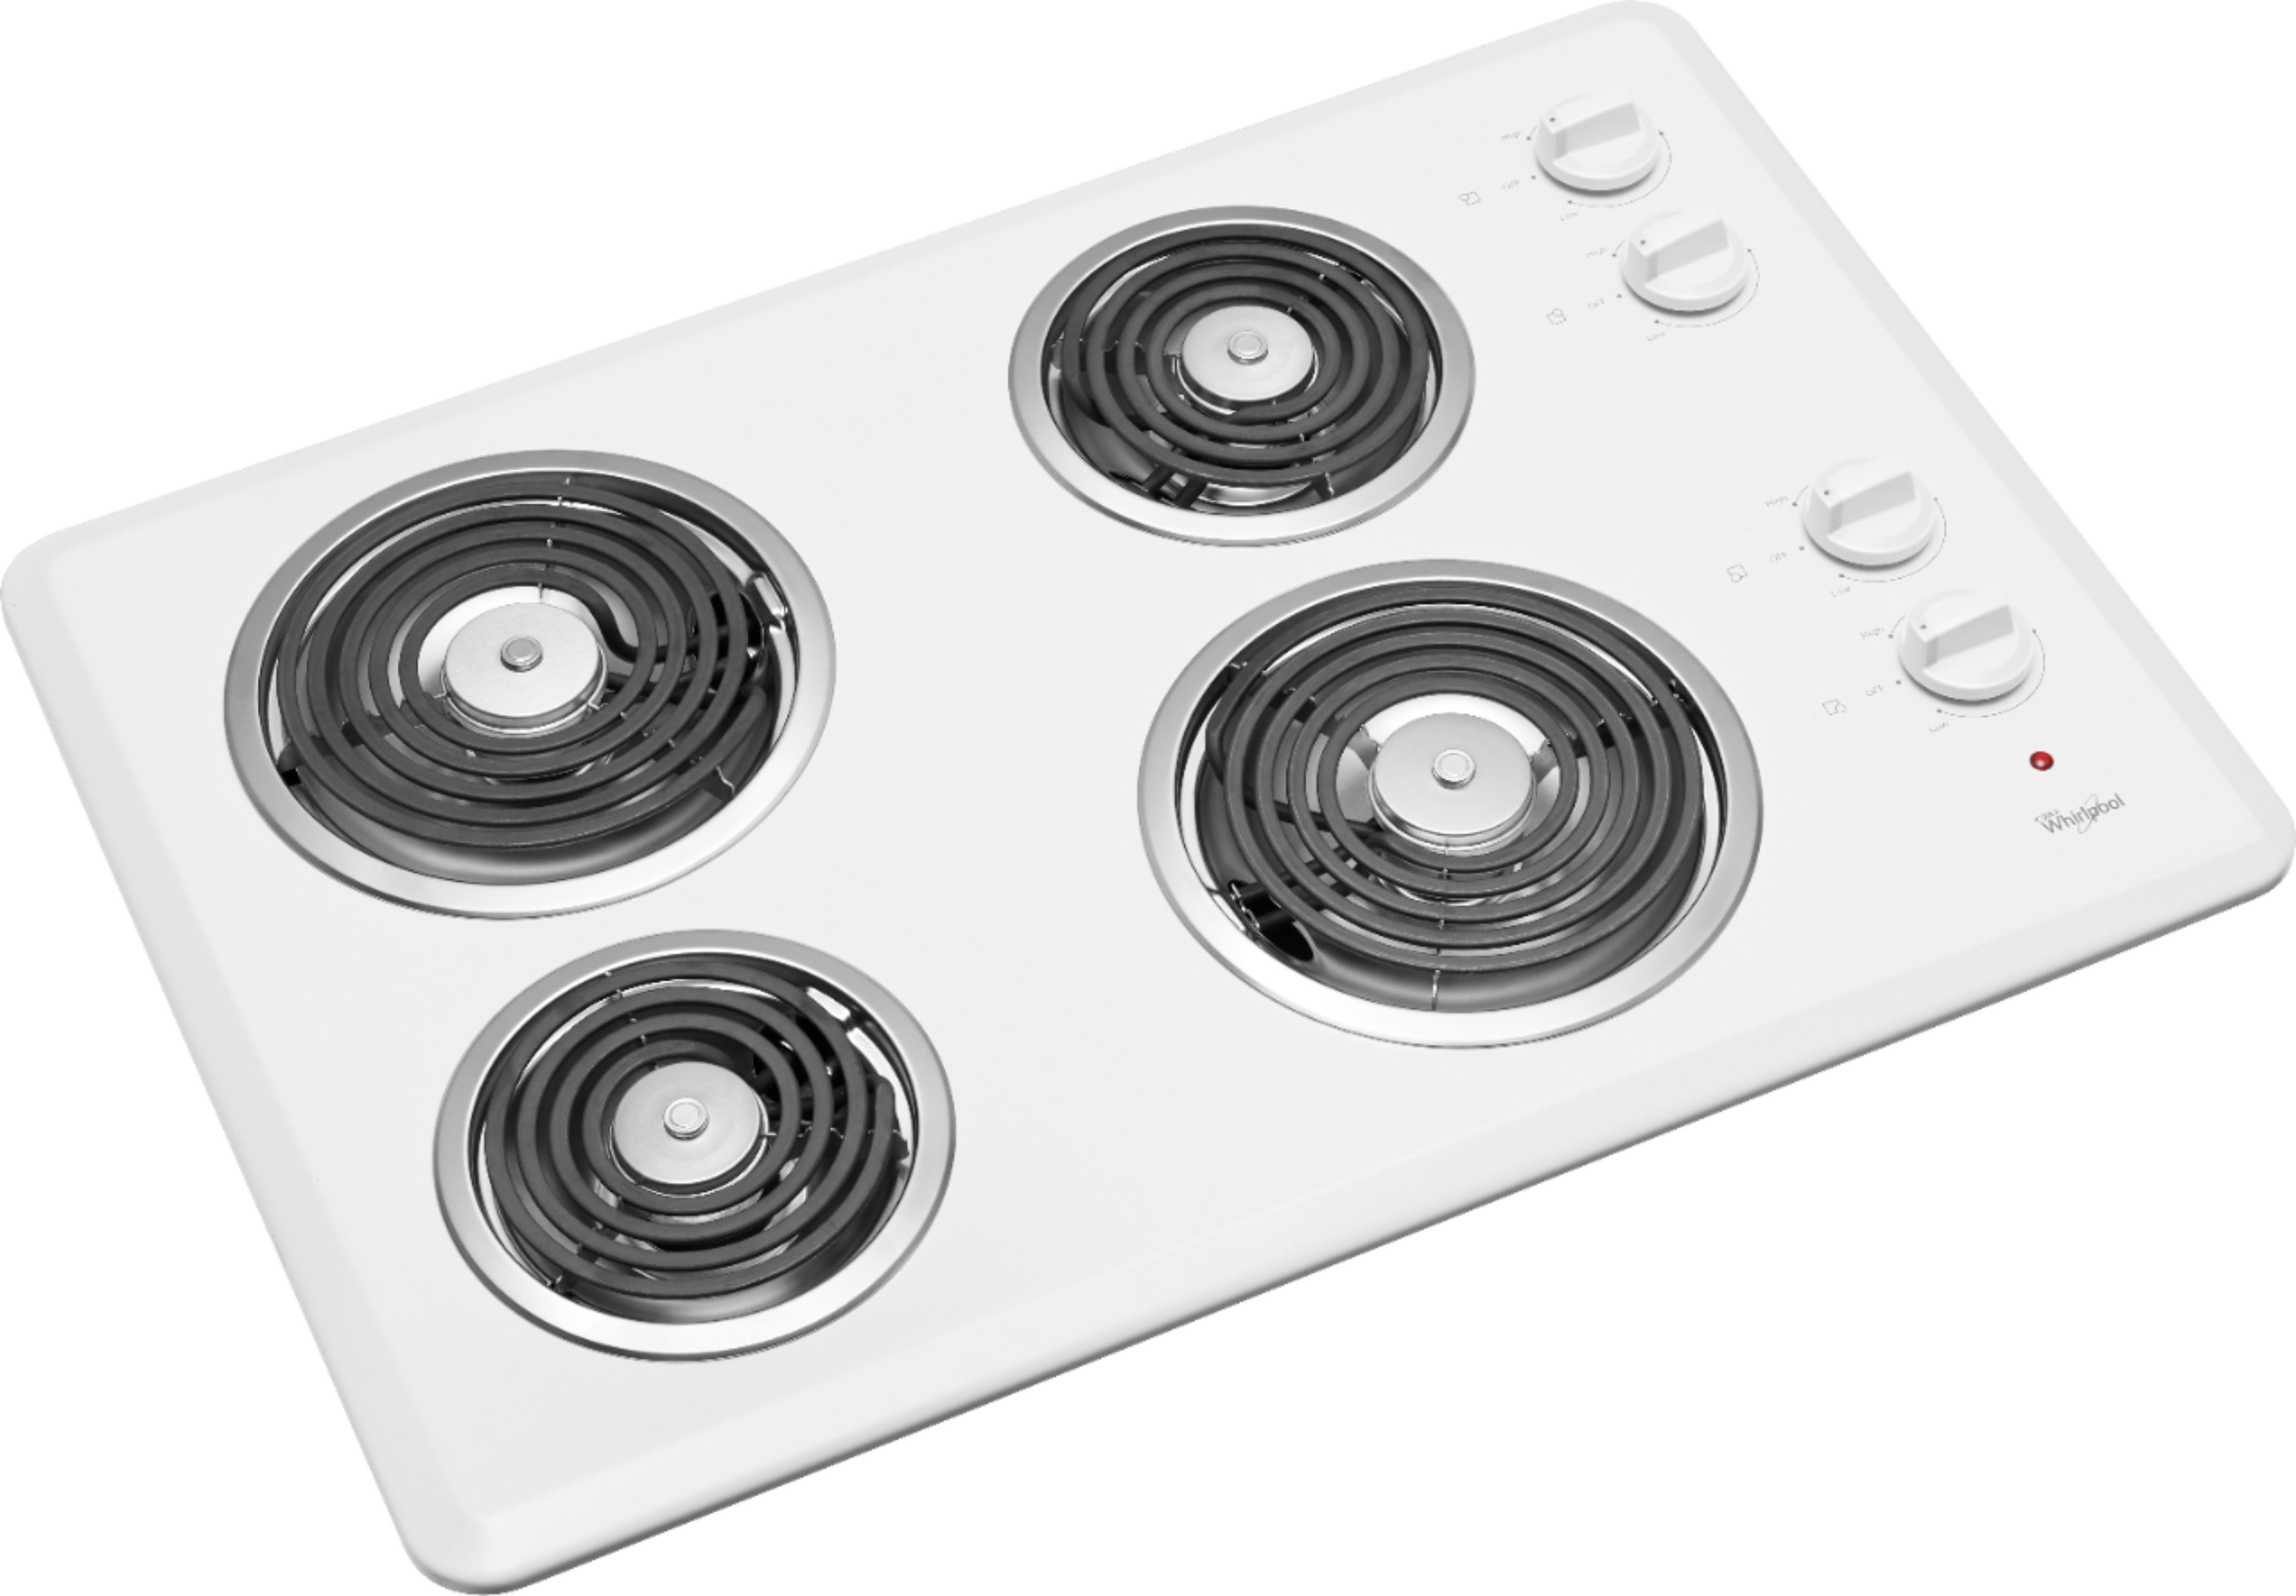 Whirlpool® 30 Electric Cooktop White WCC31430AW